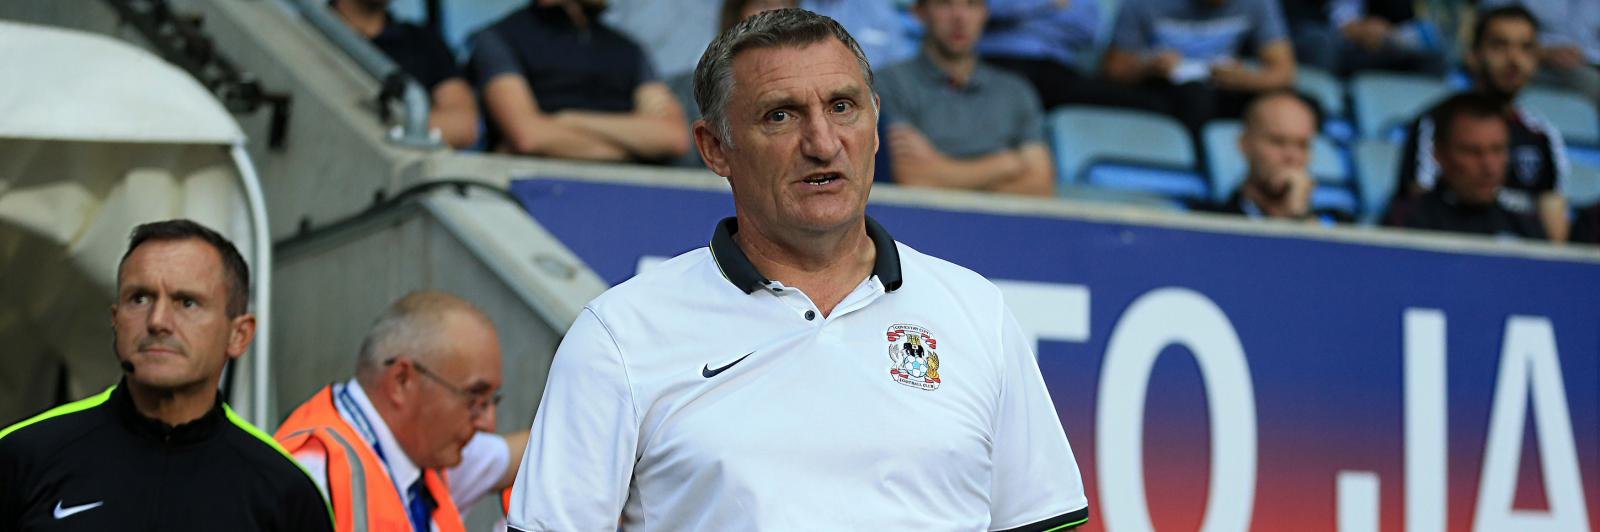 League One Preview: Rock-bottom Coventry host AFC Wimbledon, Bury visit MK Dons